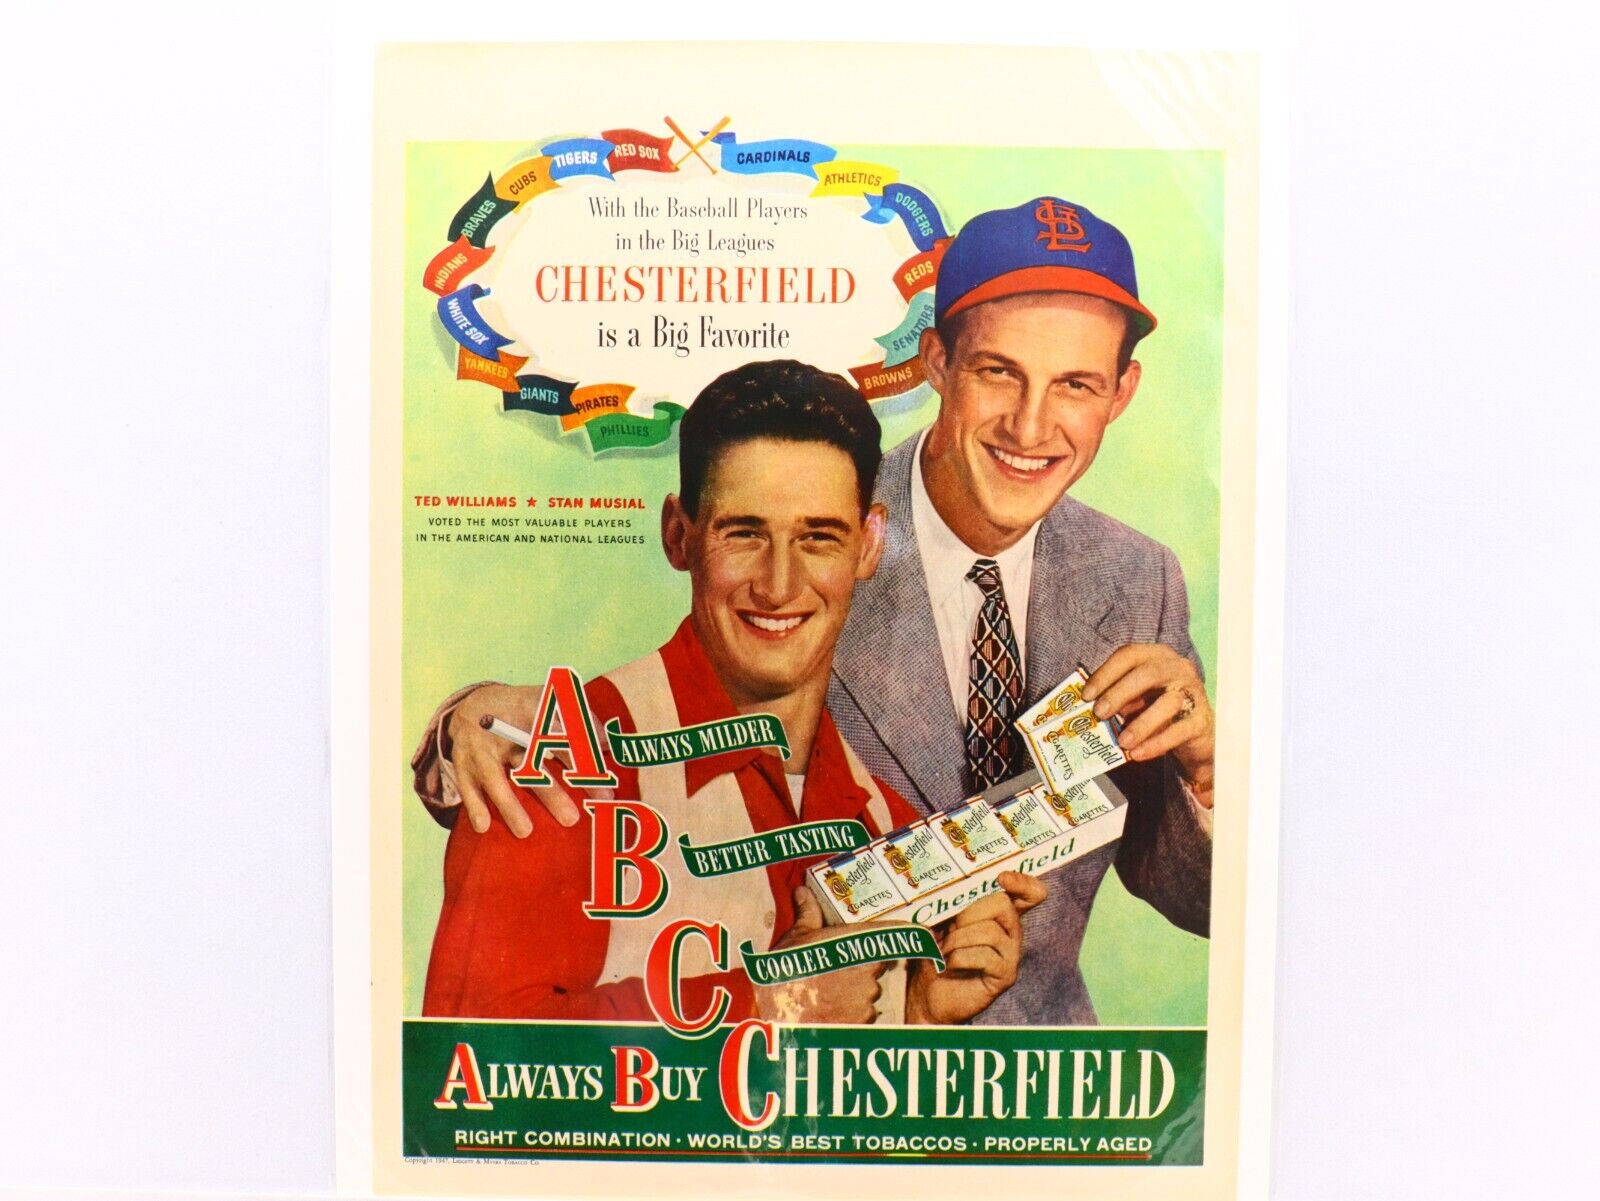 Authentic 1947 Chesterfield Ad, Baseball Stars Ted Williams And Stan Musial.